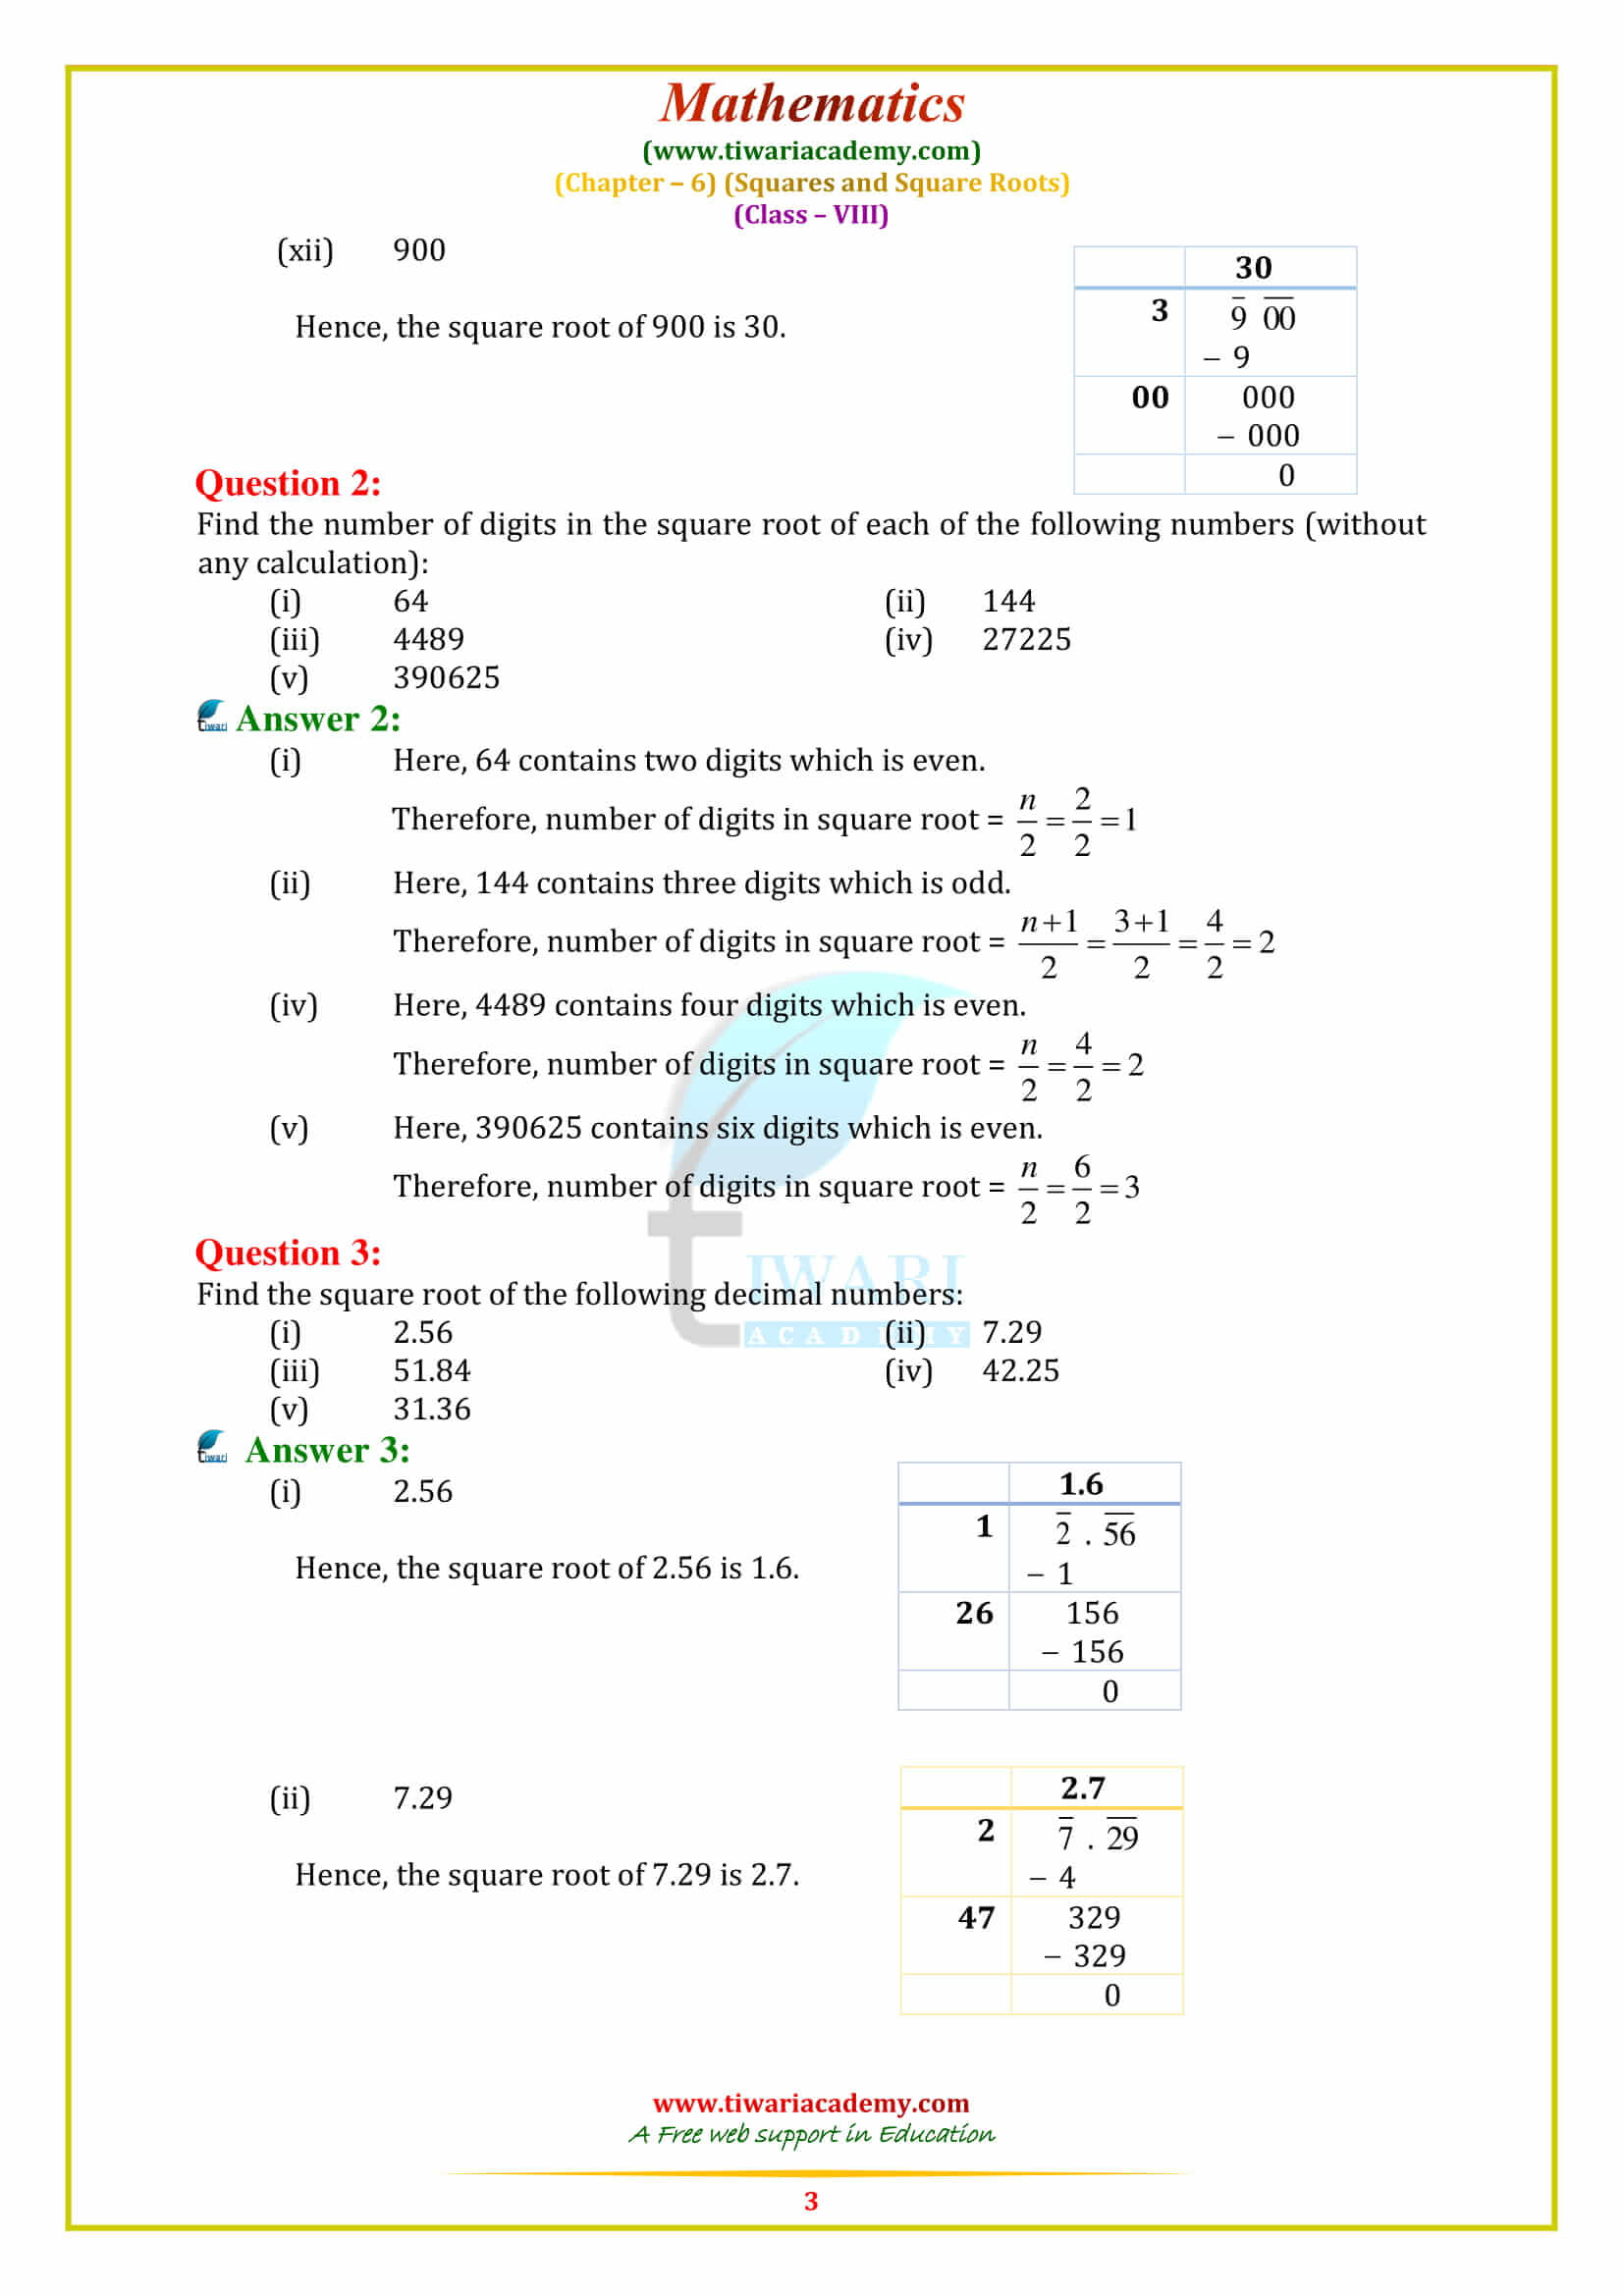 NCERT Solutions for Class 8 Maths Chapter 6 Exercise 6.4 in pdf form